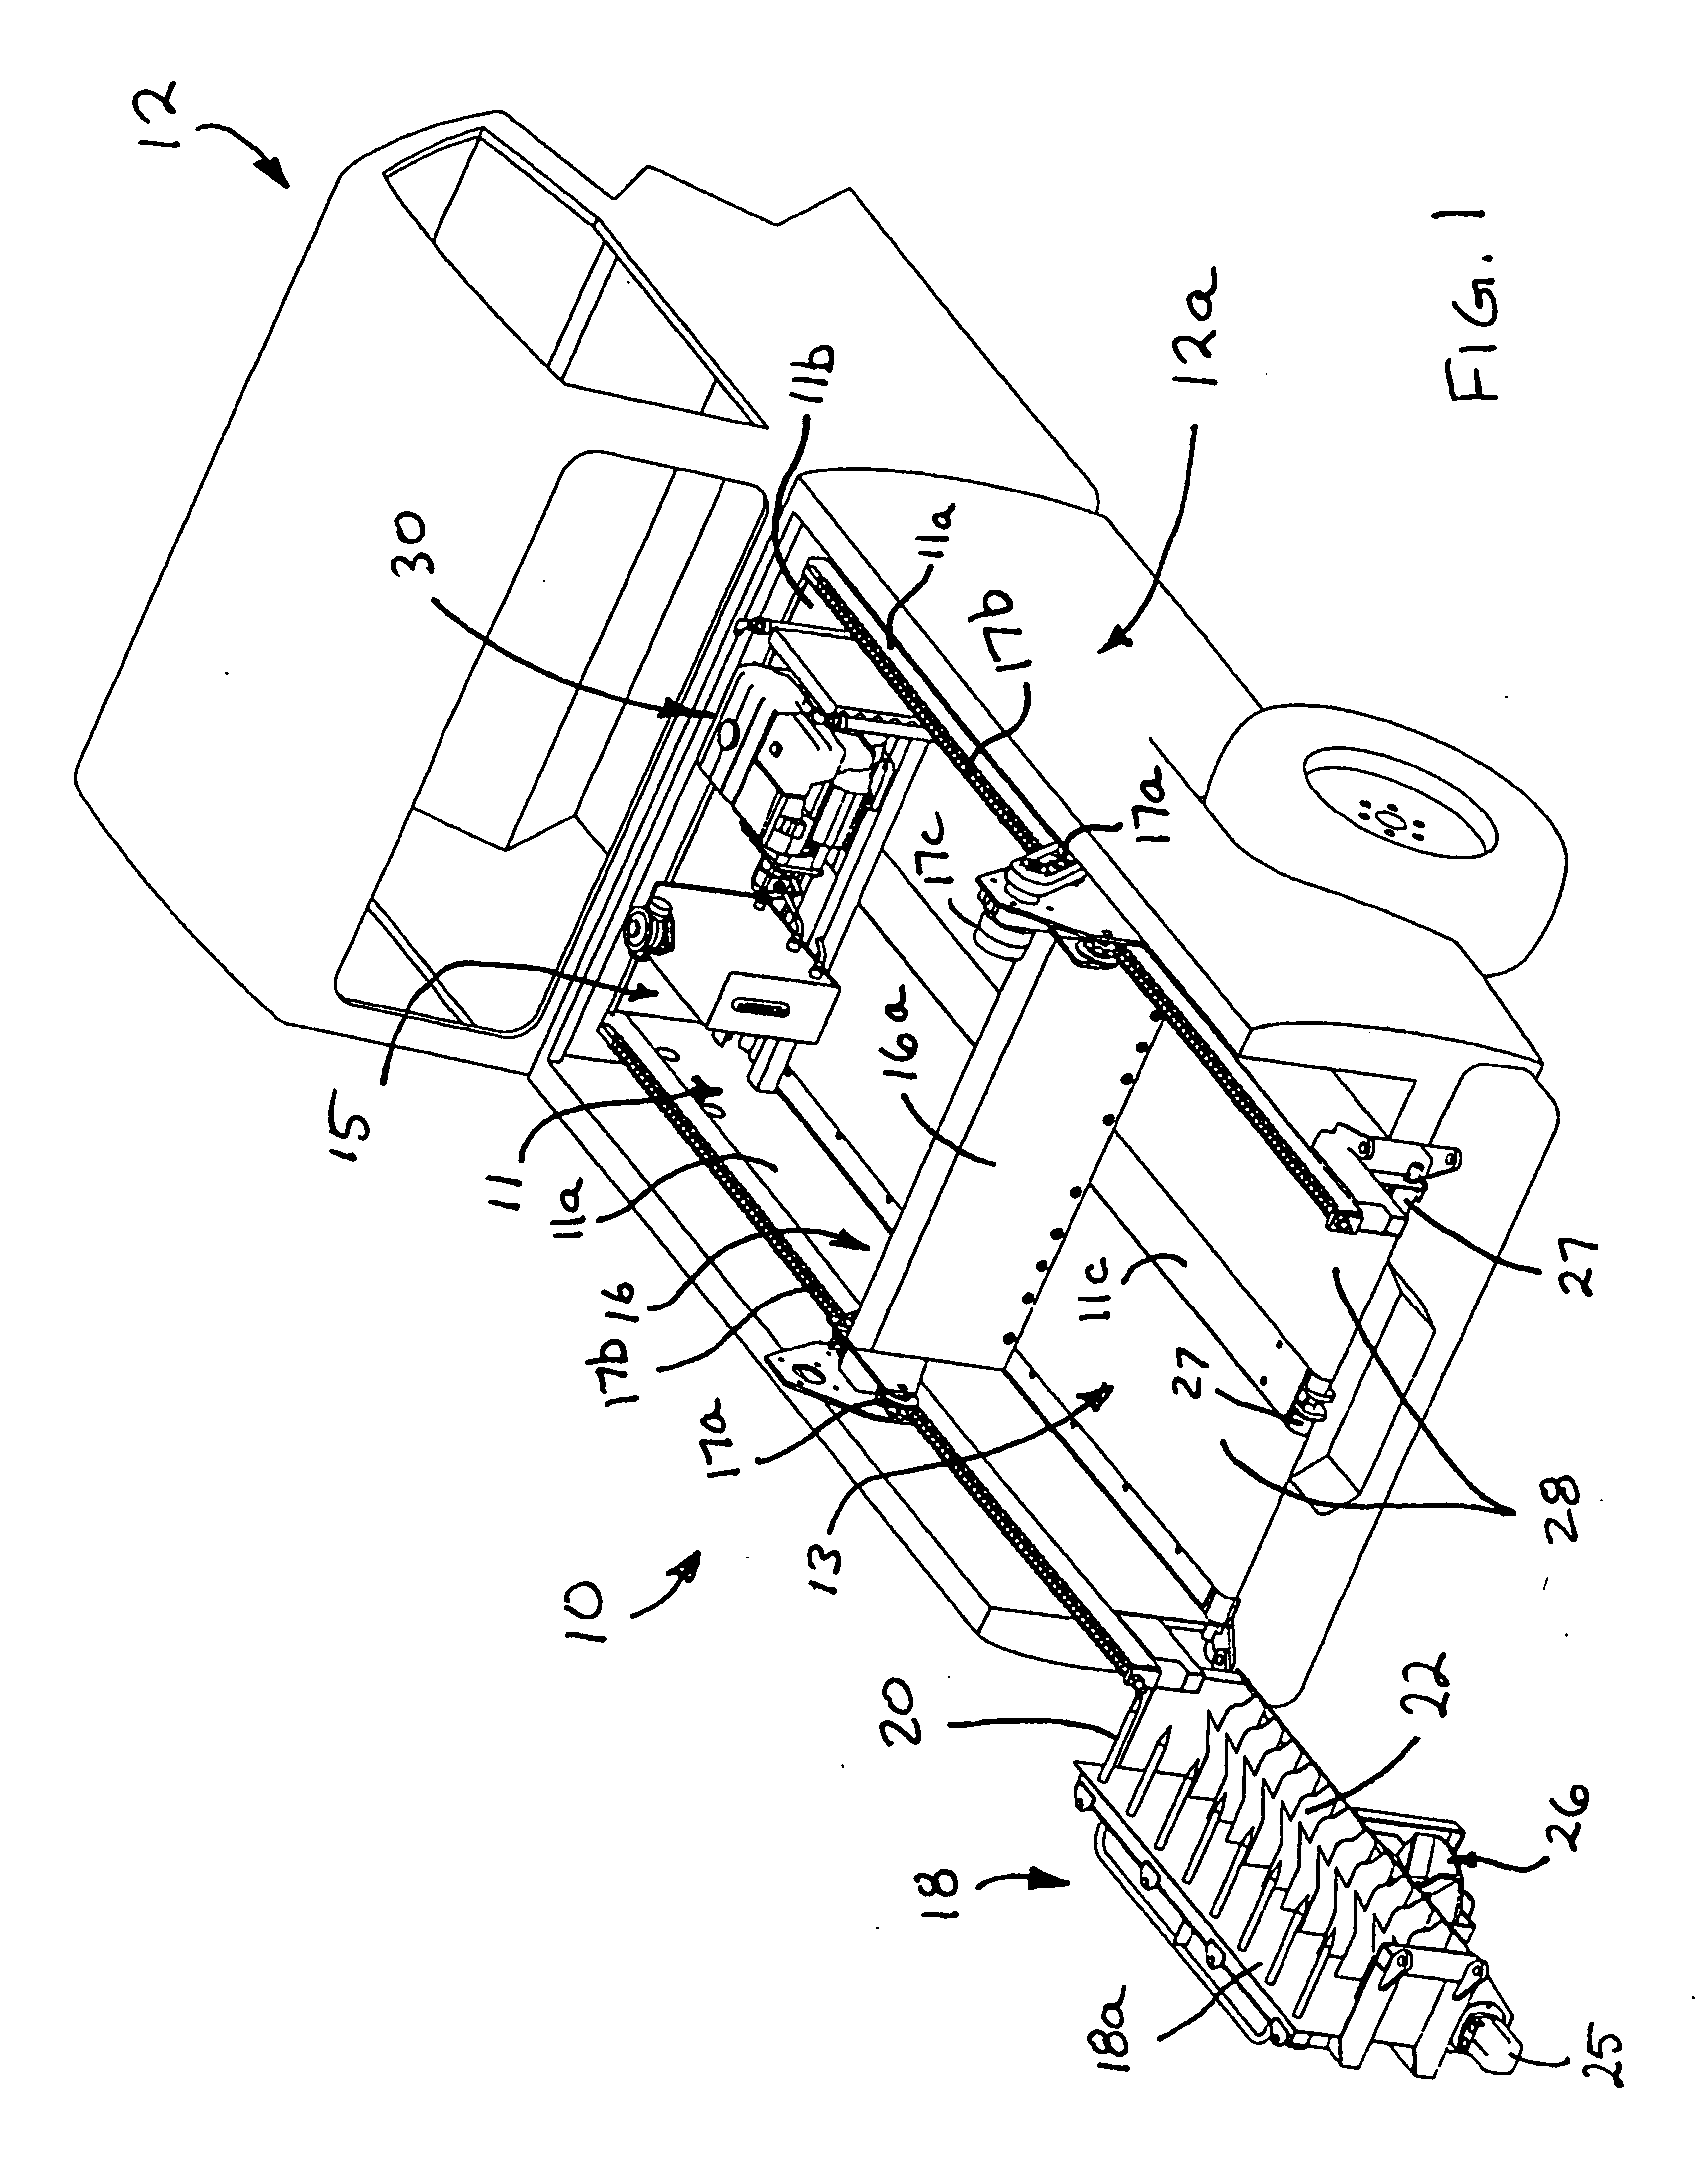 Material handling device for vehicle